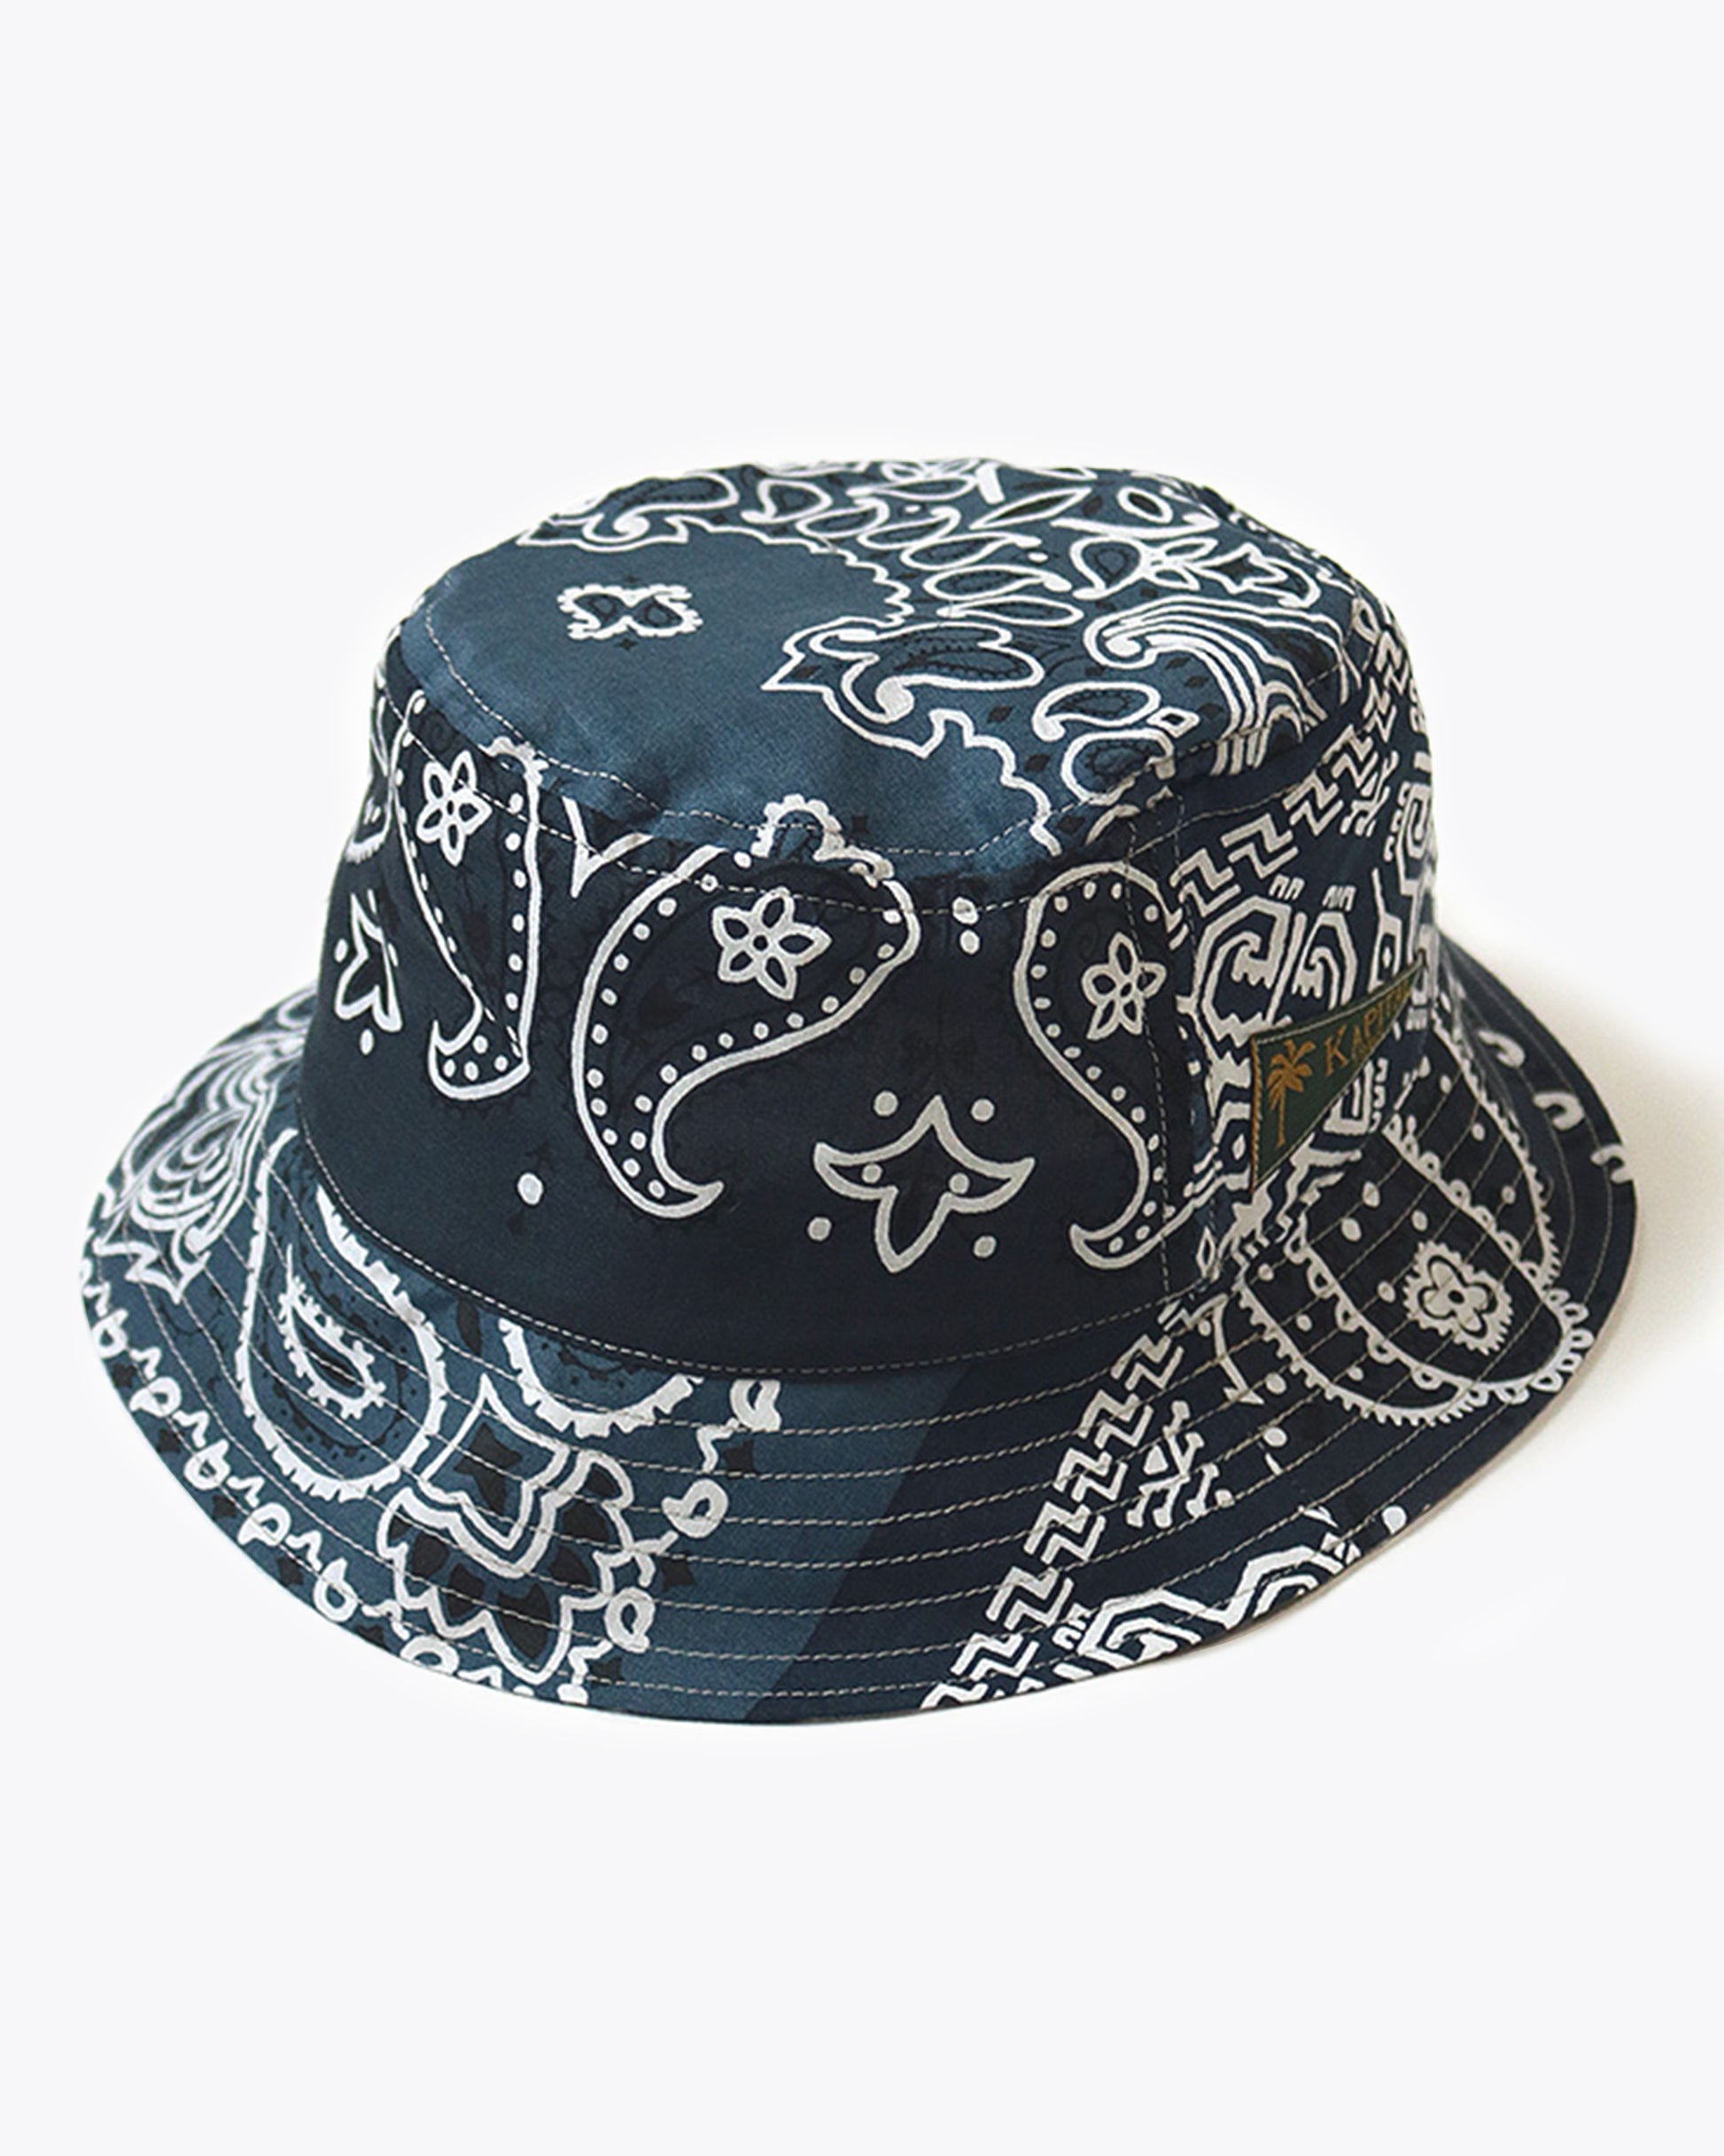 A colorful bucket hat made from vintage bandana patchwork fabric.